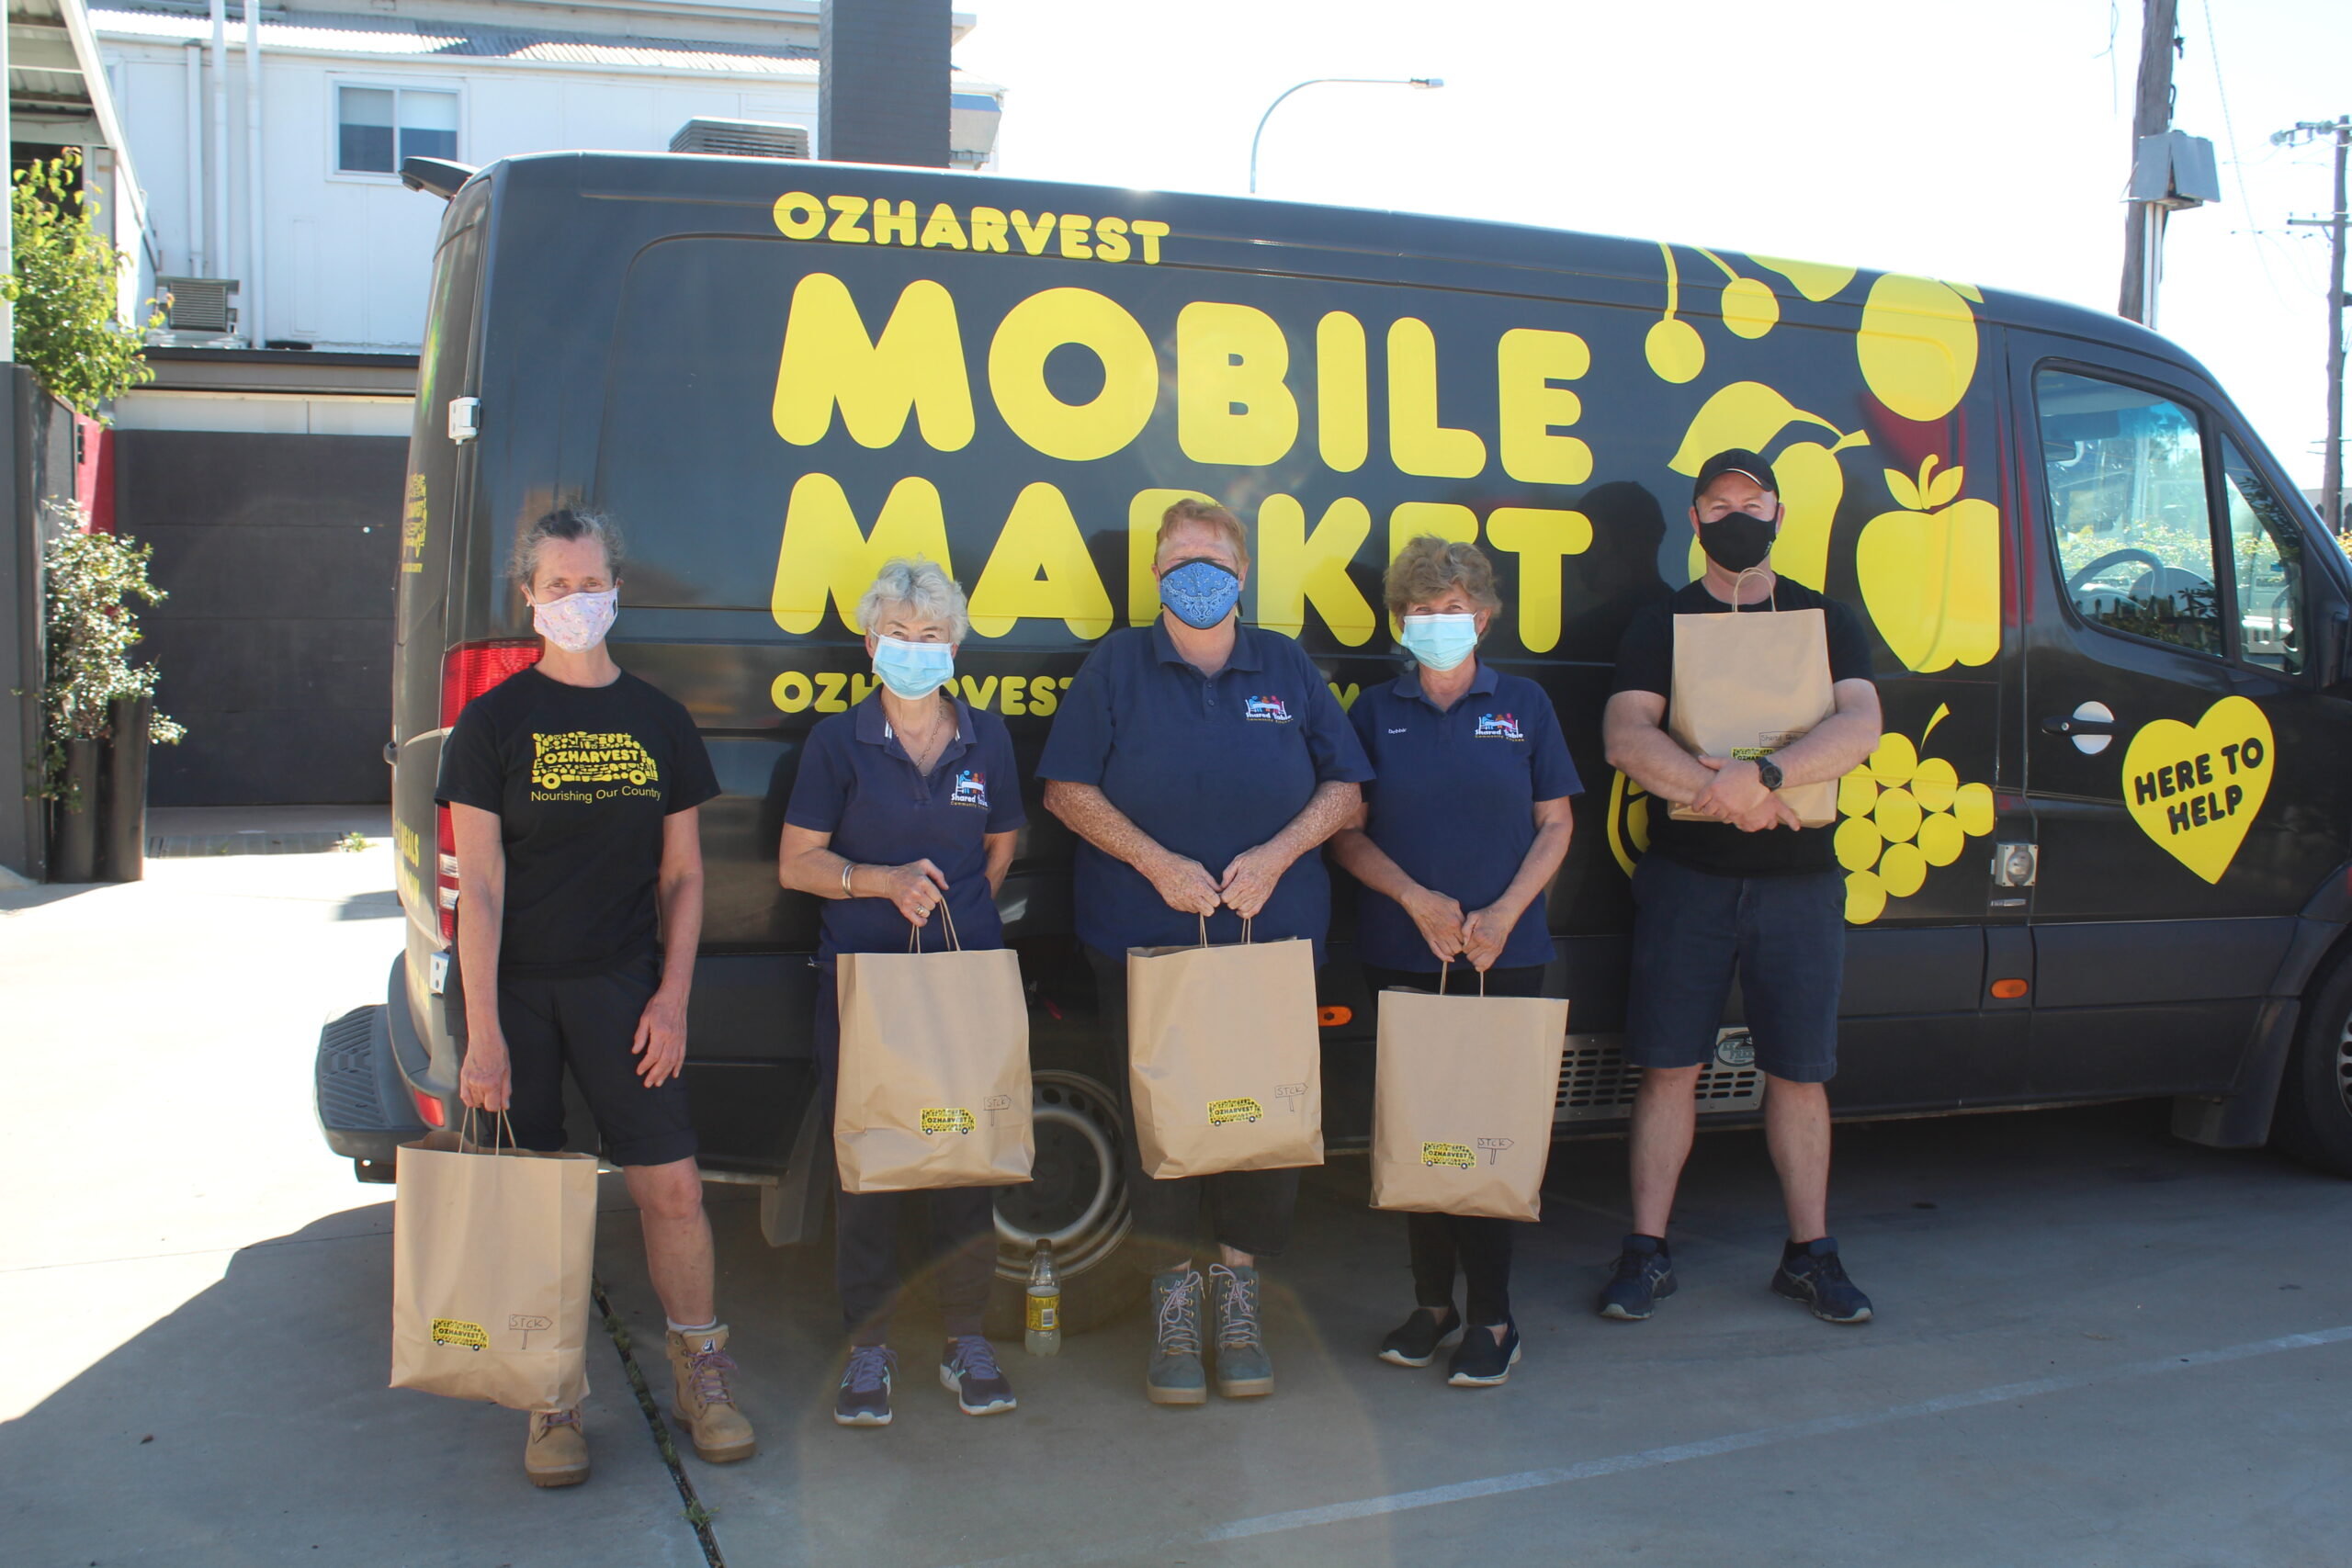 OzHarvest supports local Shared Table efforts